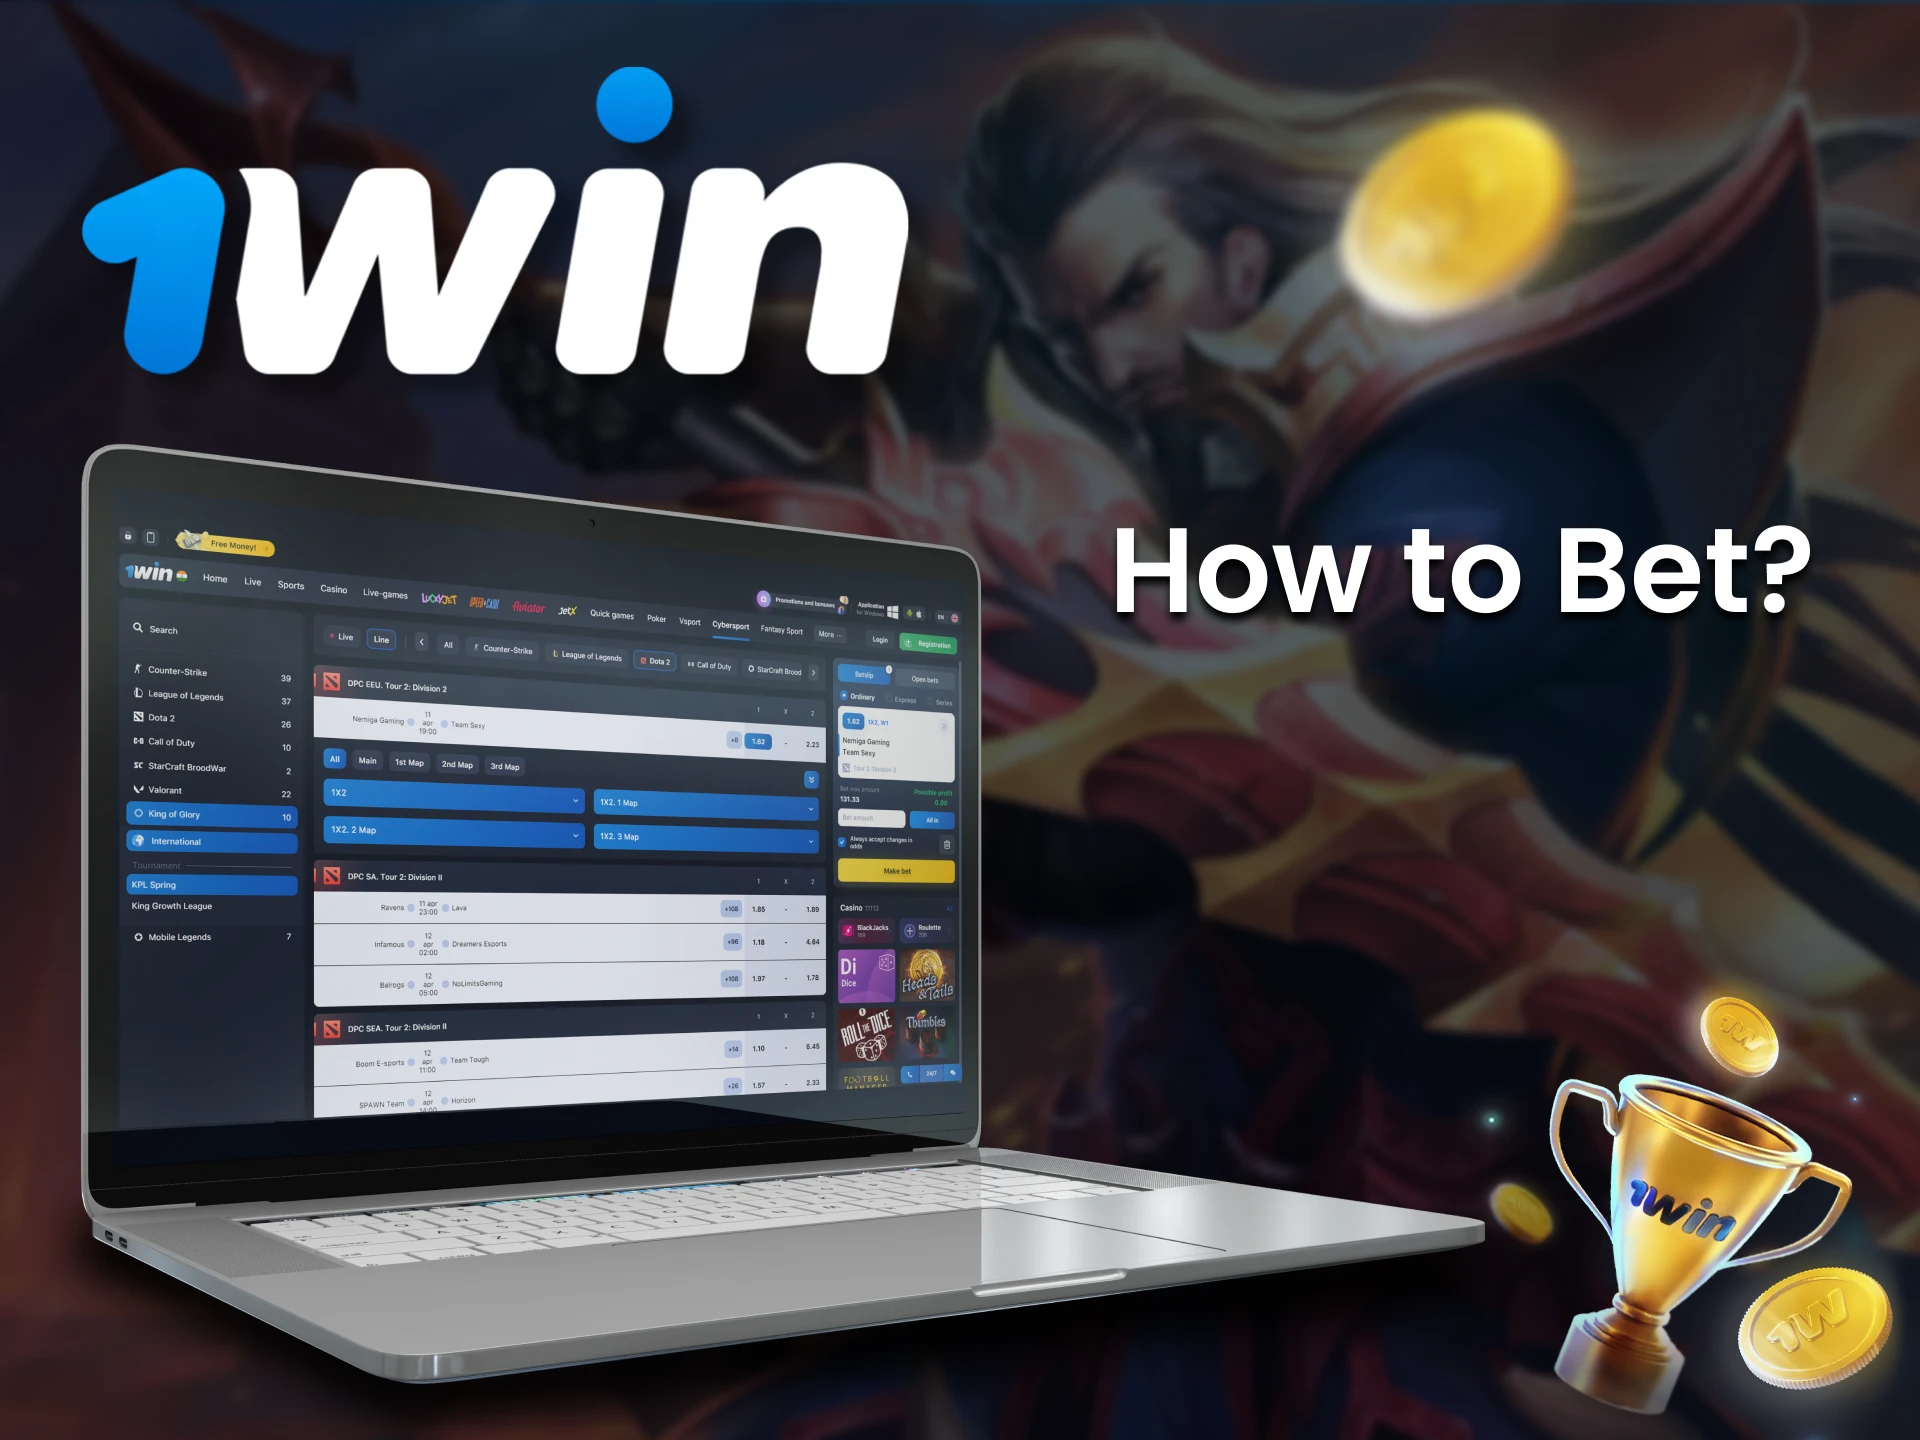 Go to the cybersport section for betting on 1win.